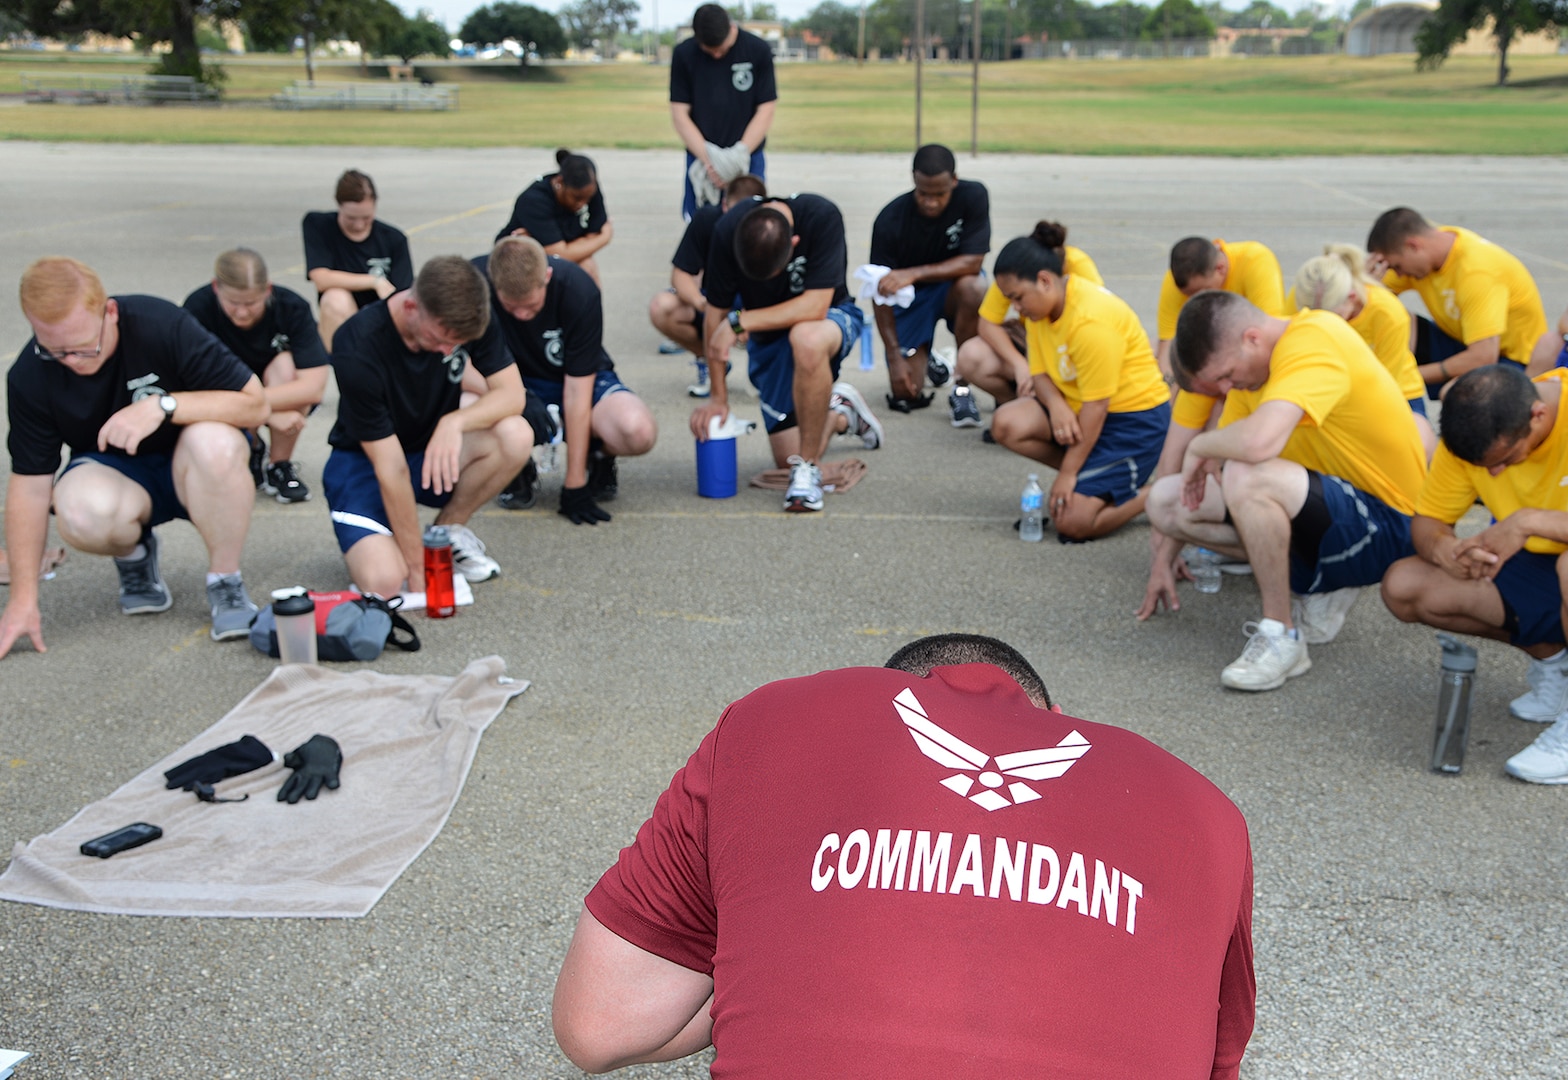 Master Sgt. John Chacon, Joint Base San Antonio Airman Leadership School commandant, pauses for a moment of silence to remember fallen Airman during warrior workouts at the Airman Leadership School August 19, at Joint Base San Antonio-Lackland. (U.S. Air Force photo by Benjamin Faske/released)